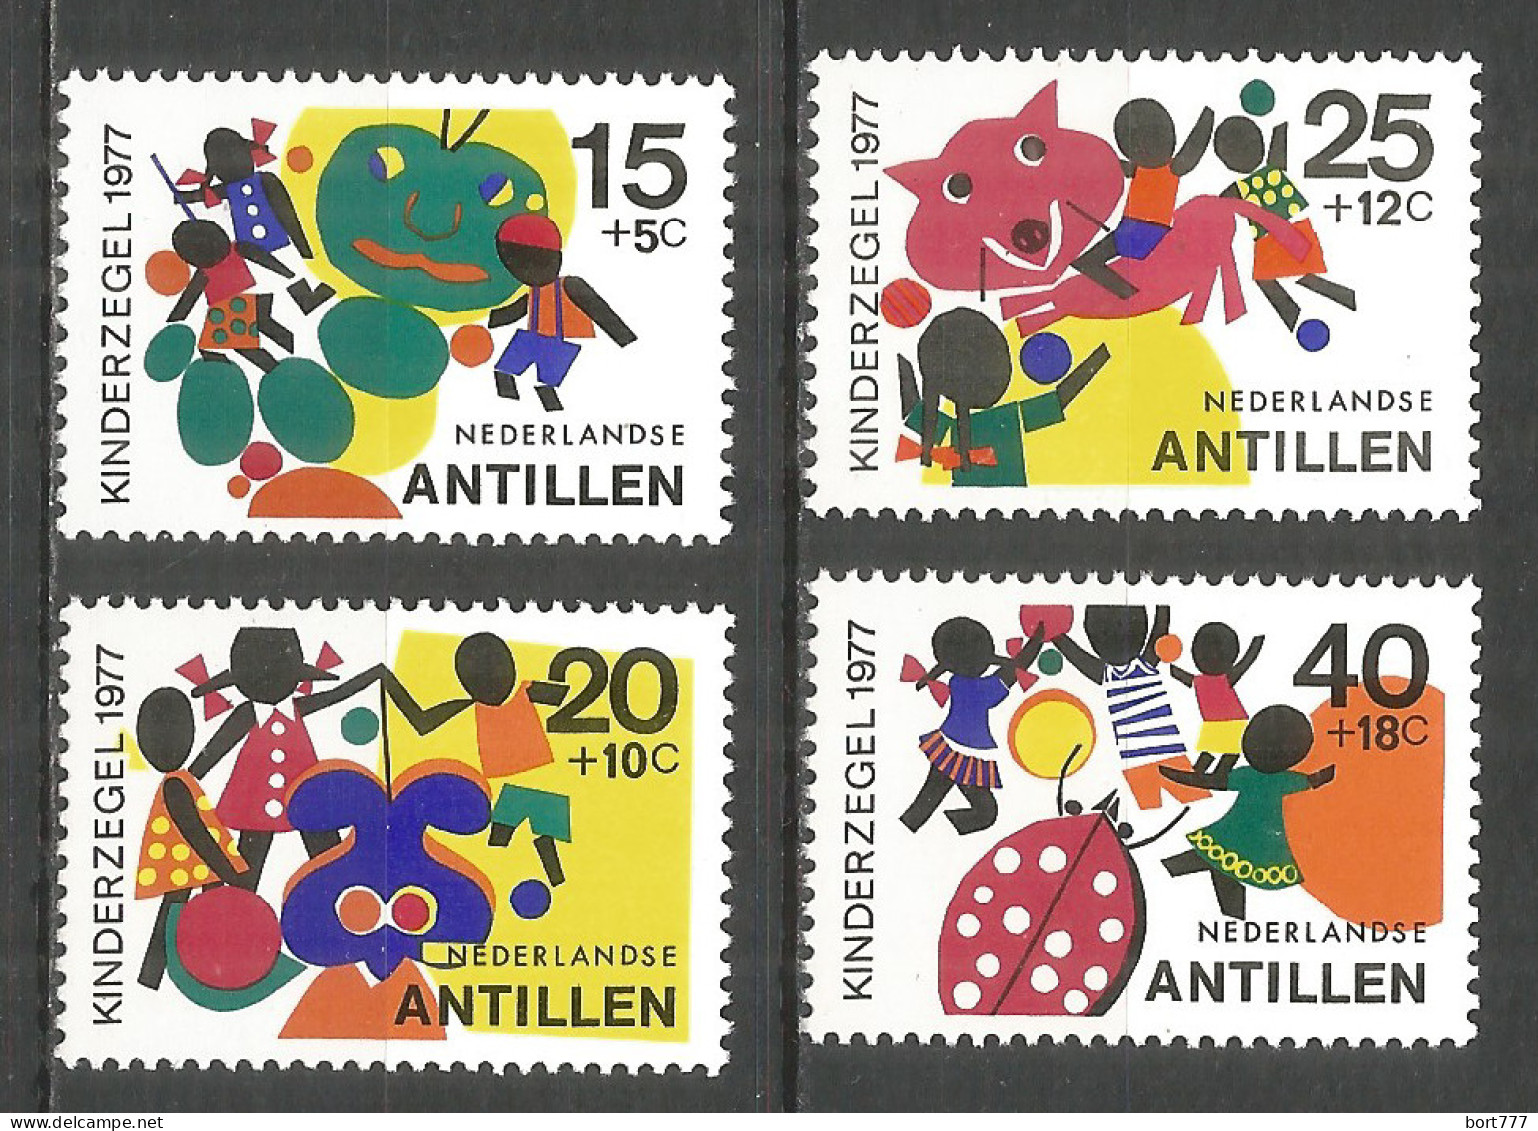 Netherlands Antilles 1977 Year, Mint Stamps MNH (**)  Michel# 341-344 - Curacao, Netherlands Antilles, Aruba